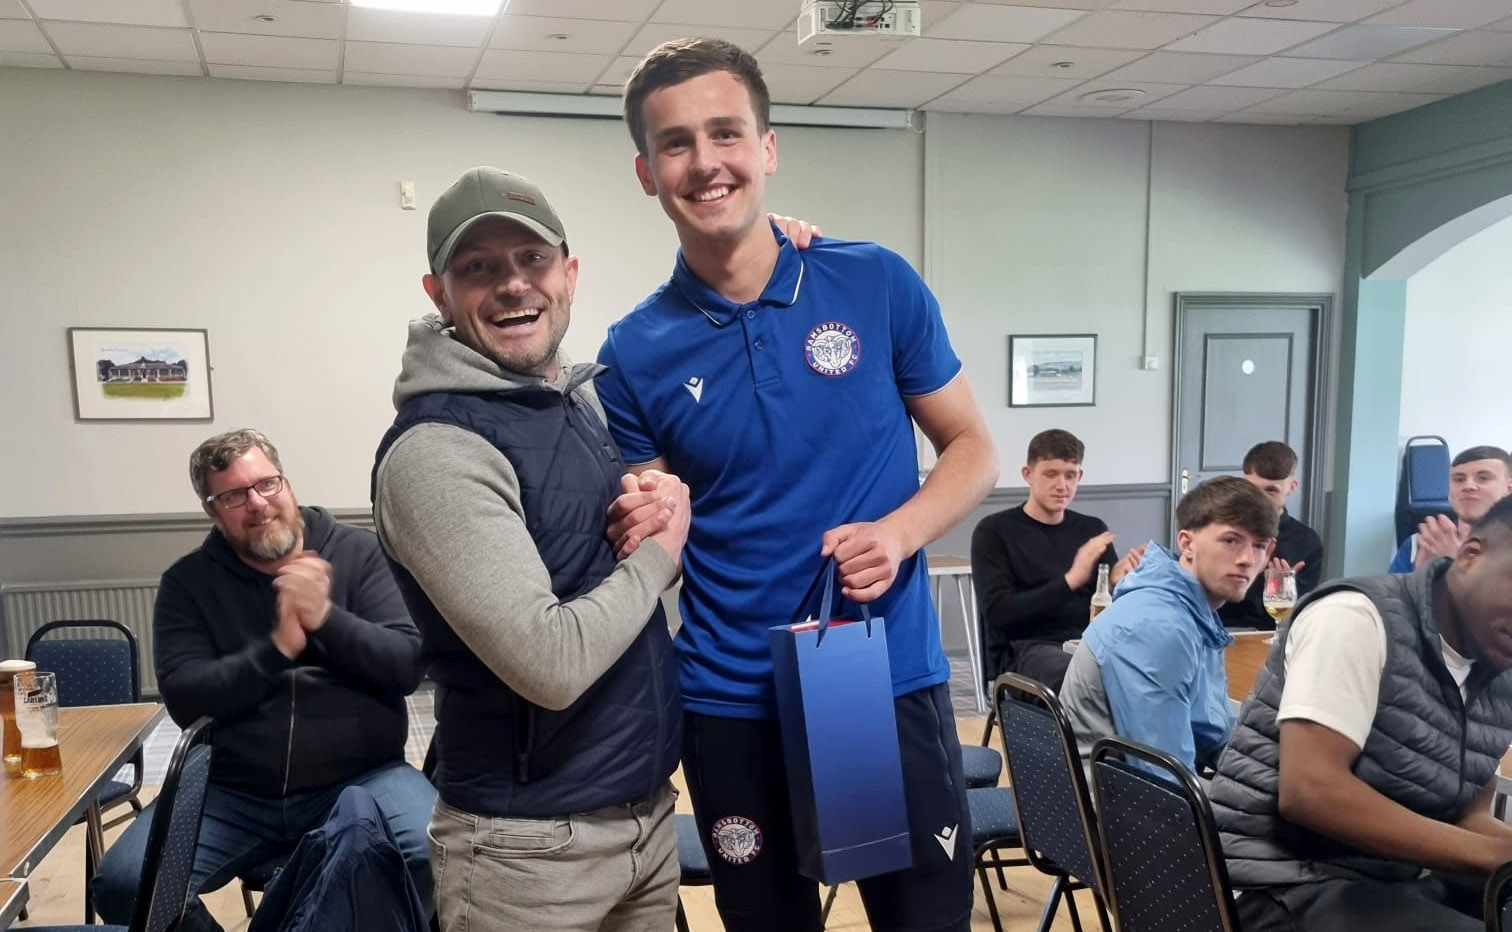 RADCLIFFE SCOOPS PLAYER OF THE SEASON AWARD